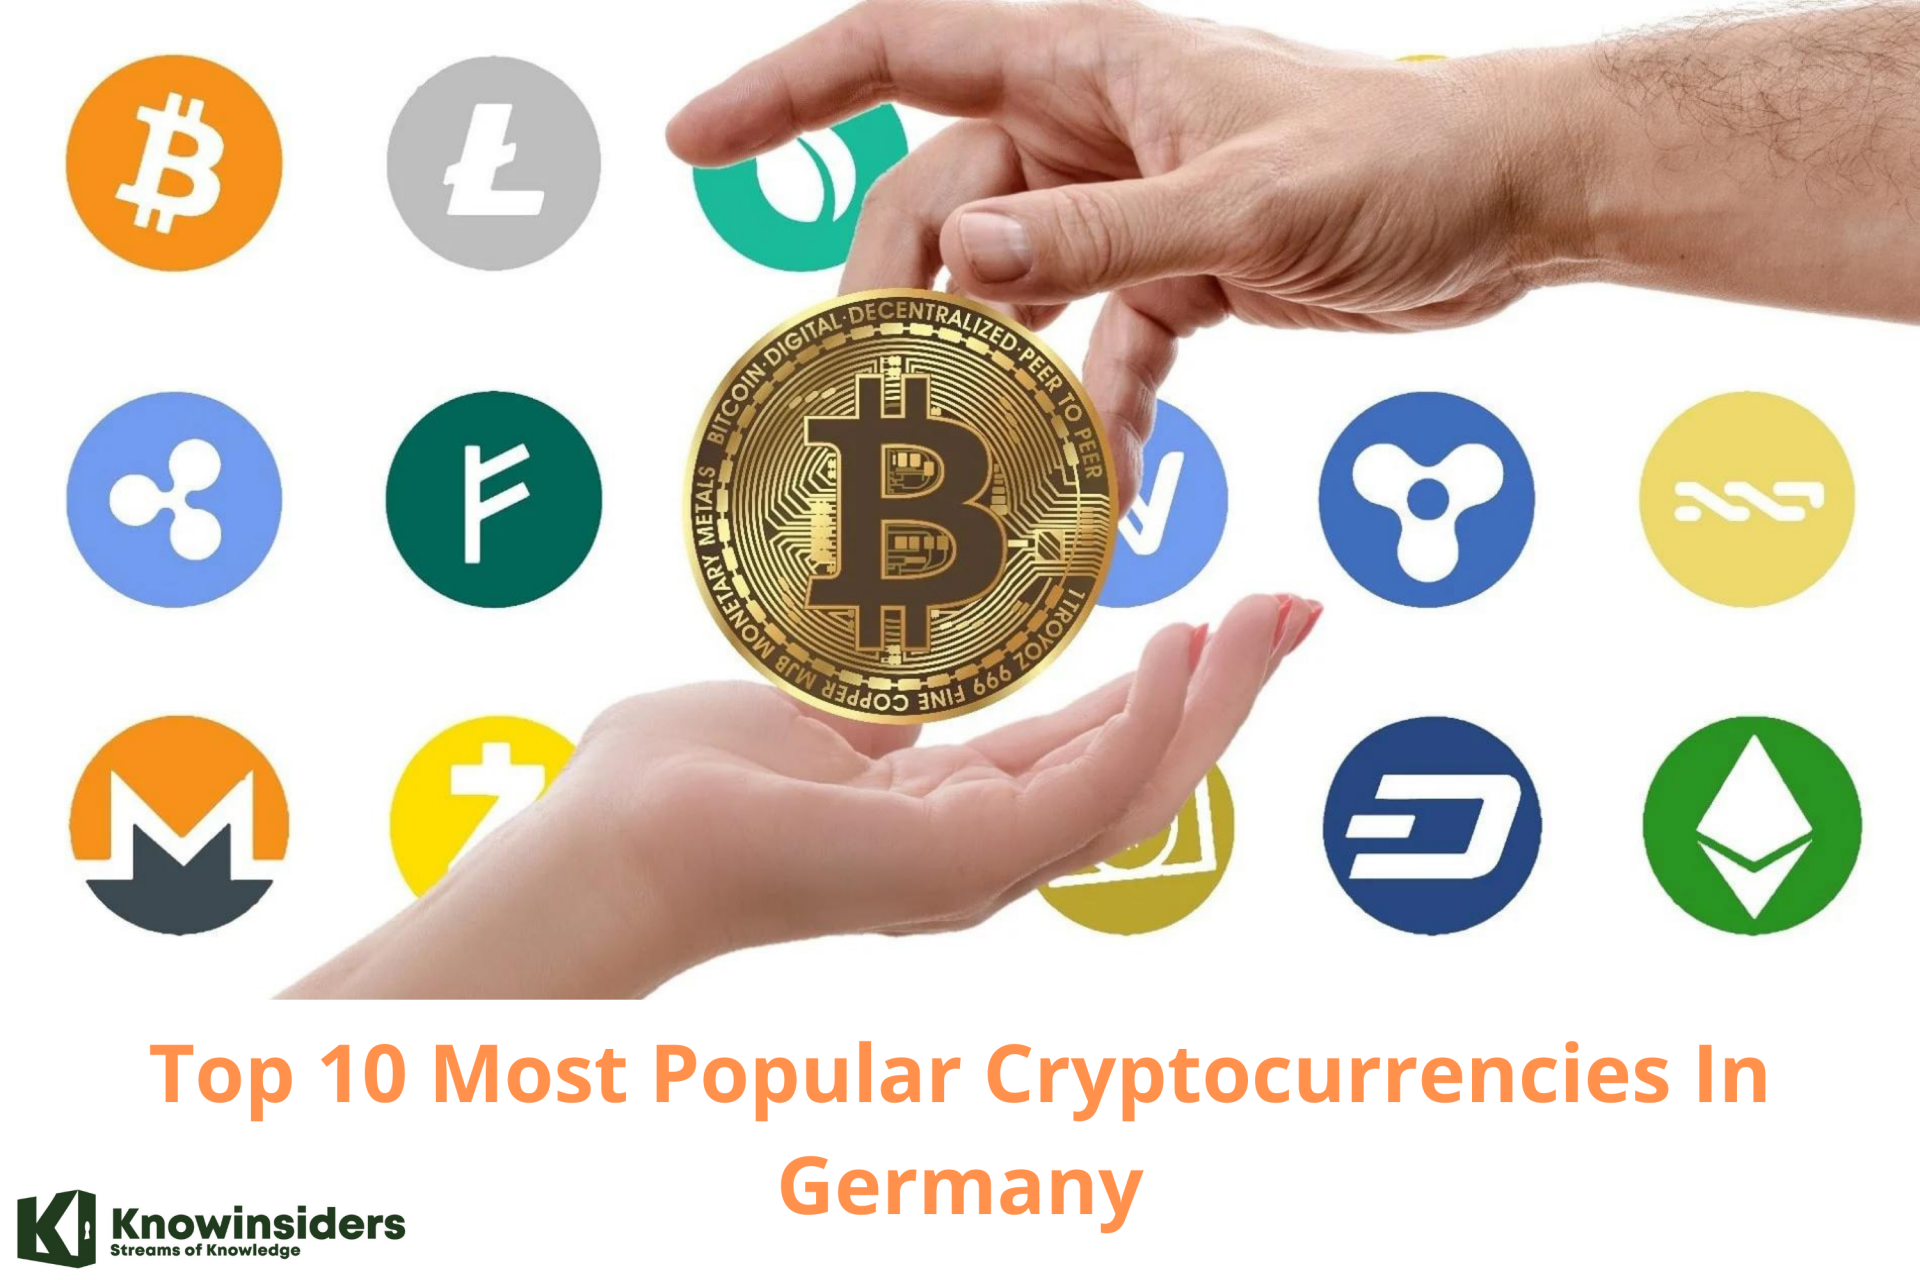 What Are the Most Popular Cryptocurrencies In Germany?